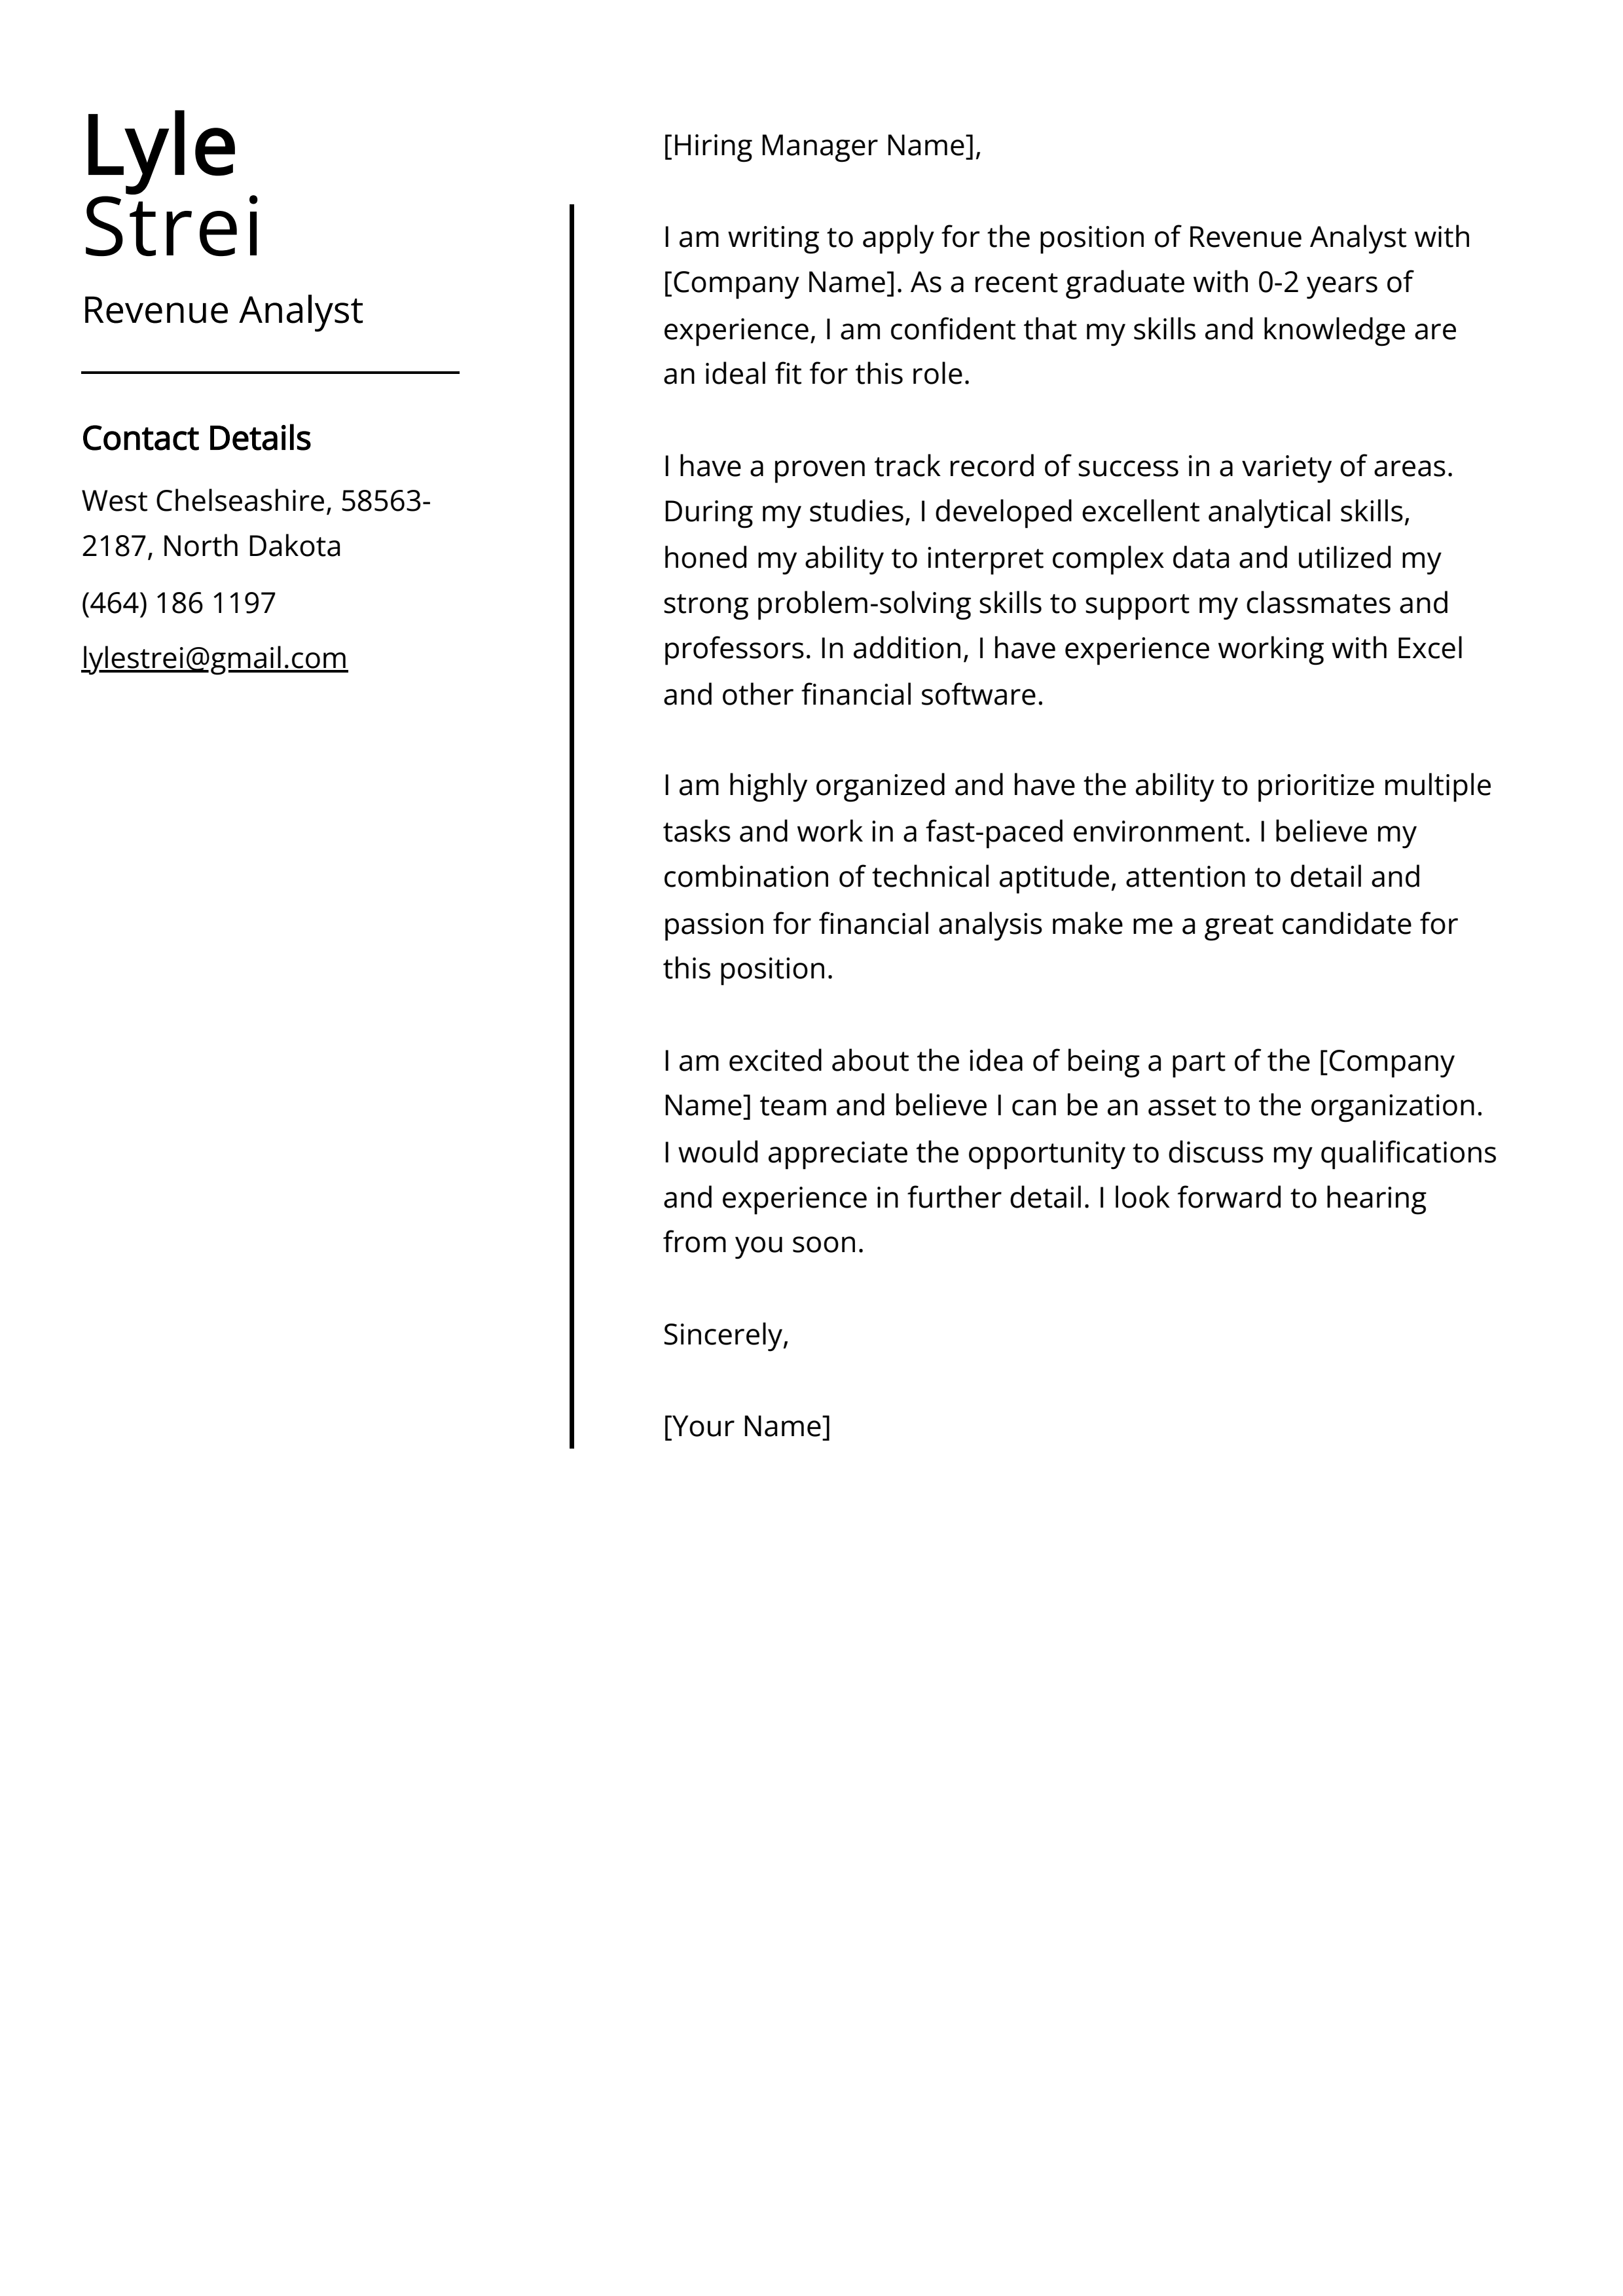 Revenue Analyst Cover Letter Example